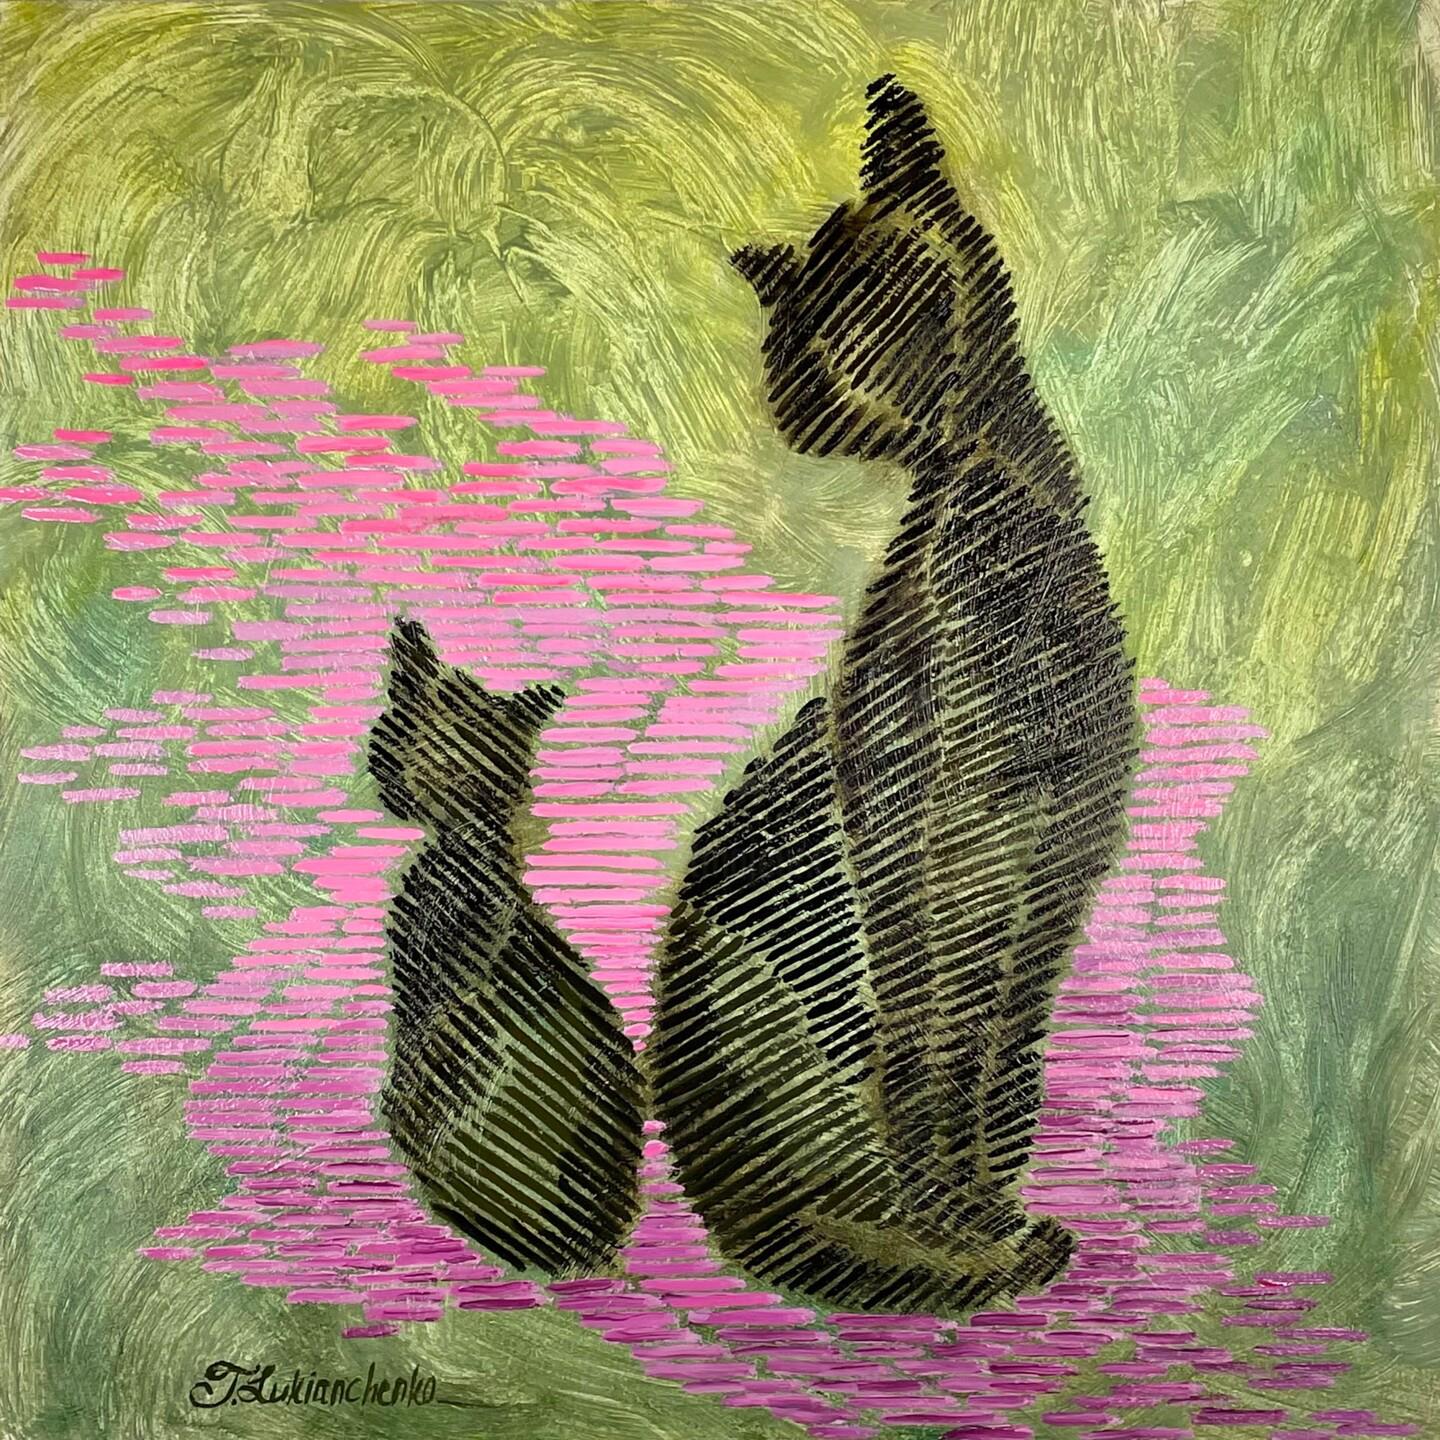 Unknown Abstract Painting - Black Cats, Oil Painting by Tetiana Lukianchenko, 2022